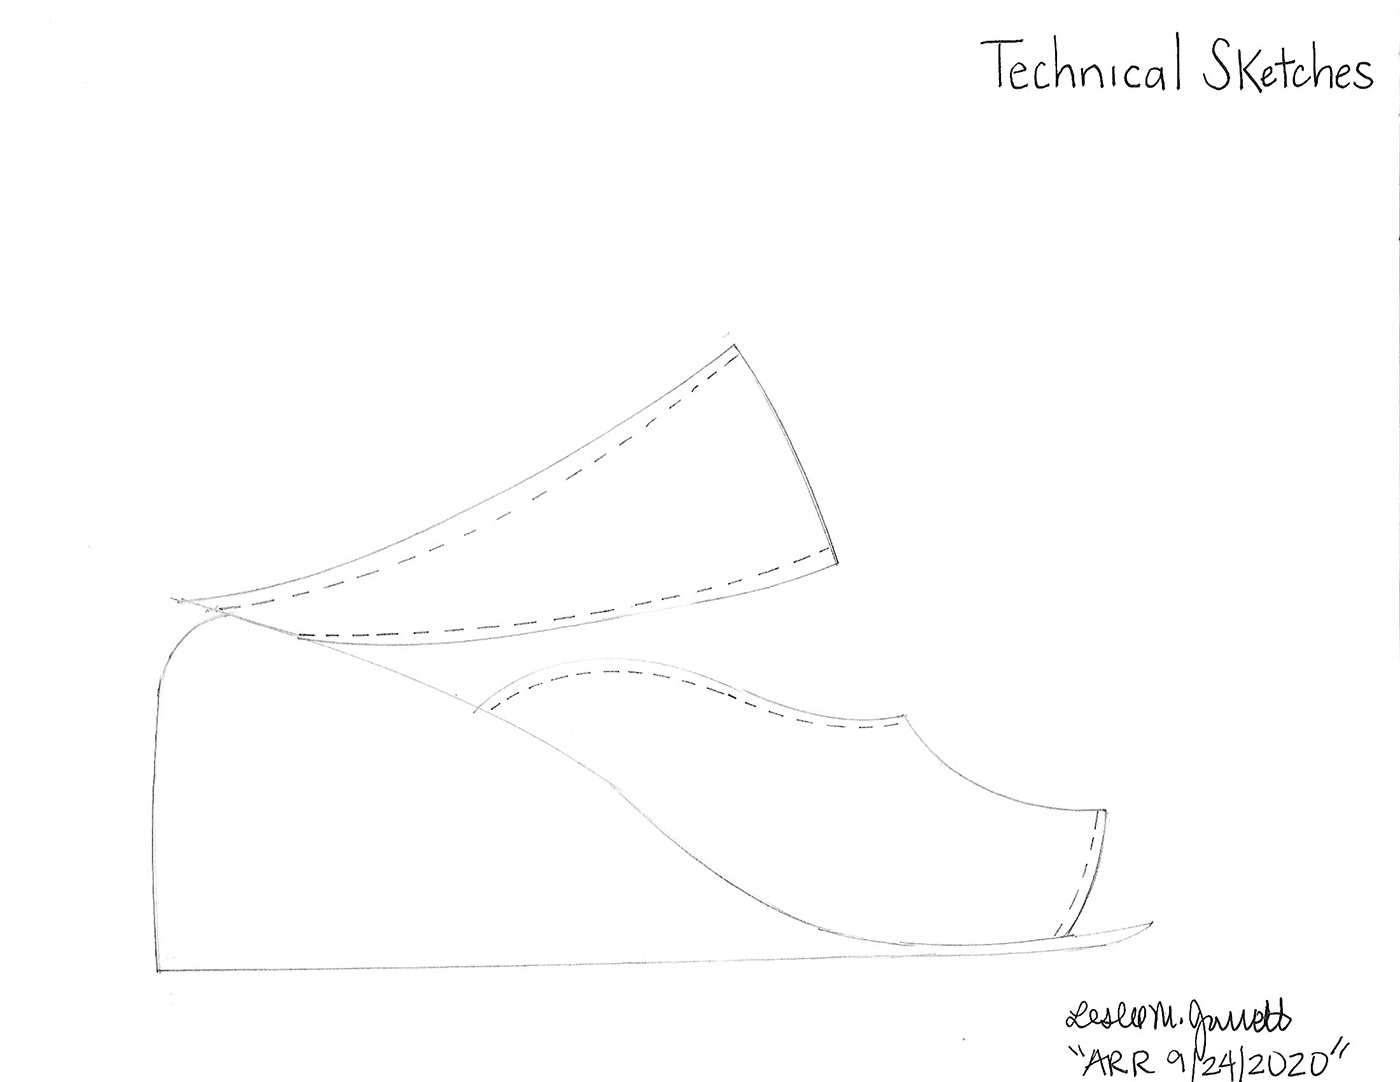 accessories design footwear product development shoes sketches